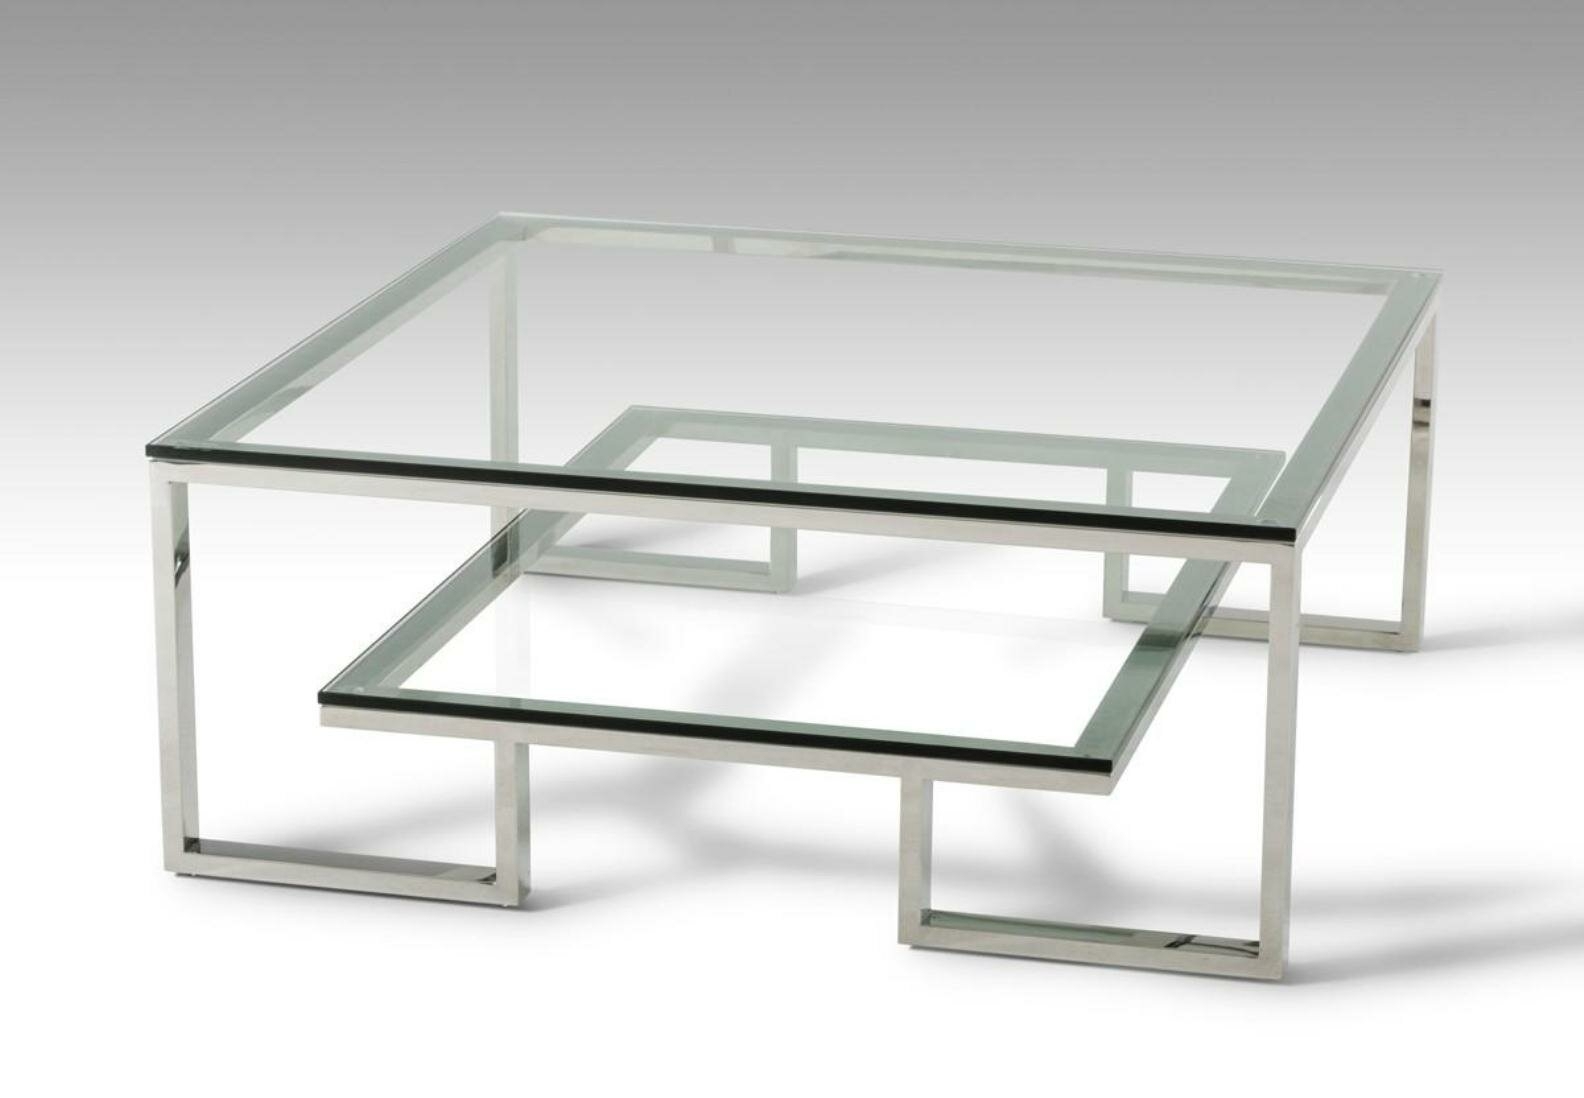 Glass Square Coffee Table For Living Room